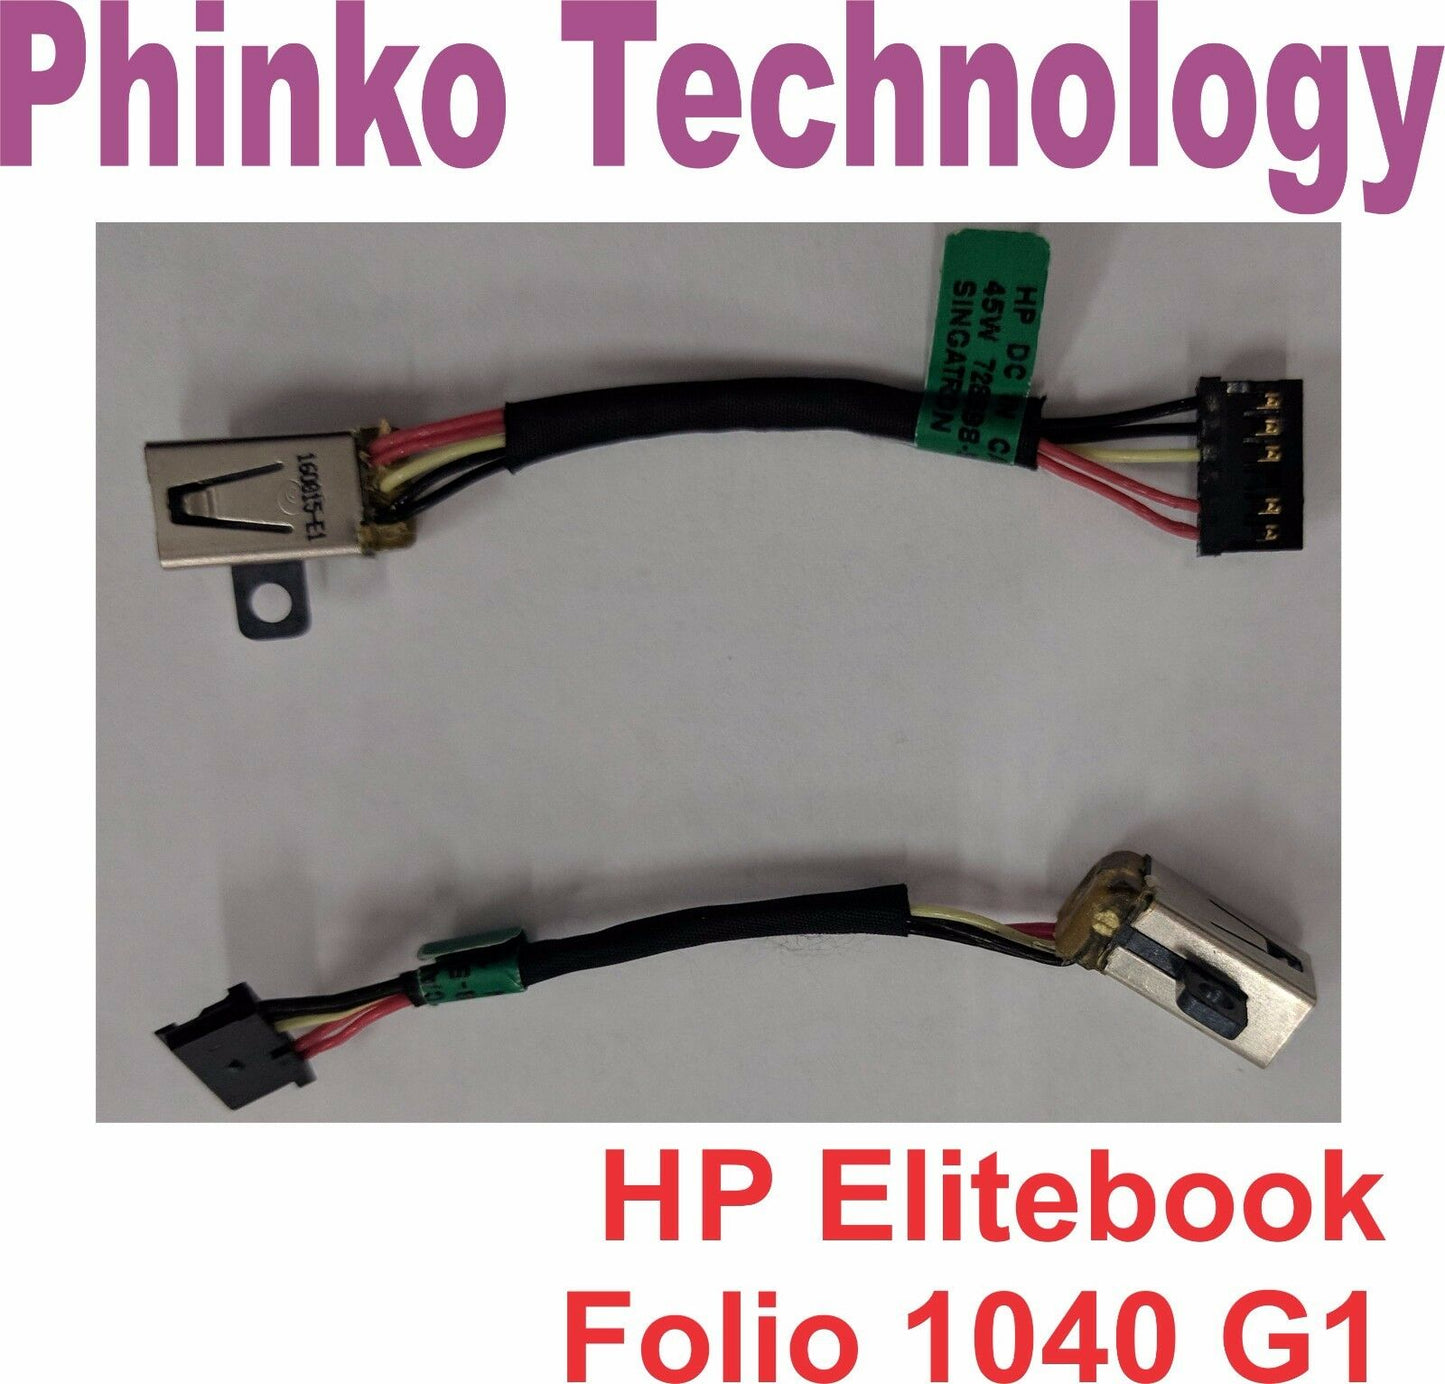 NEW DC Power Jack For HP Elitebook Folio 1040 G1 Series with Harness Cable